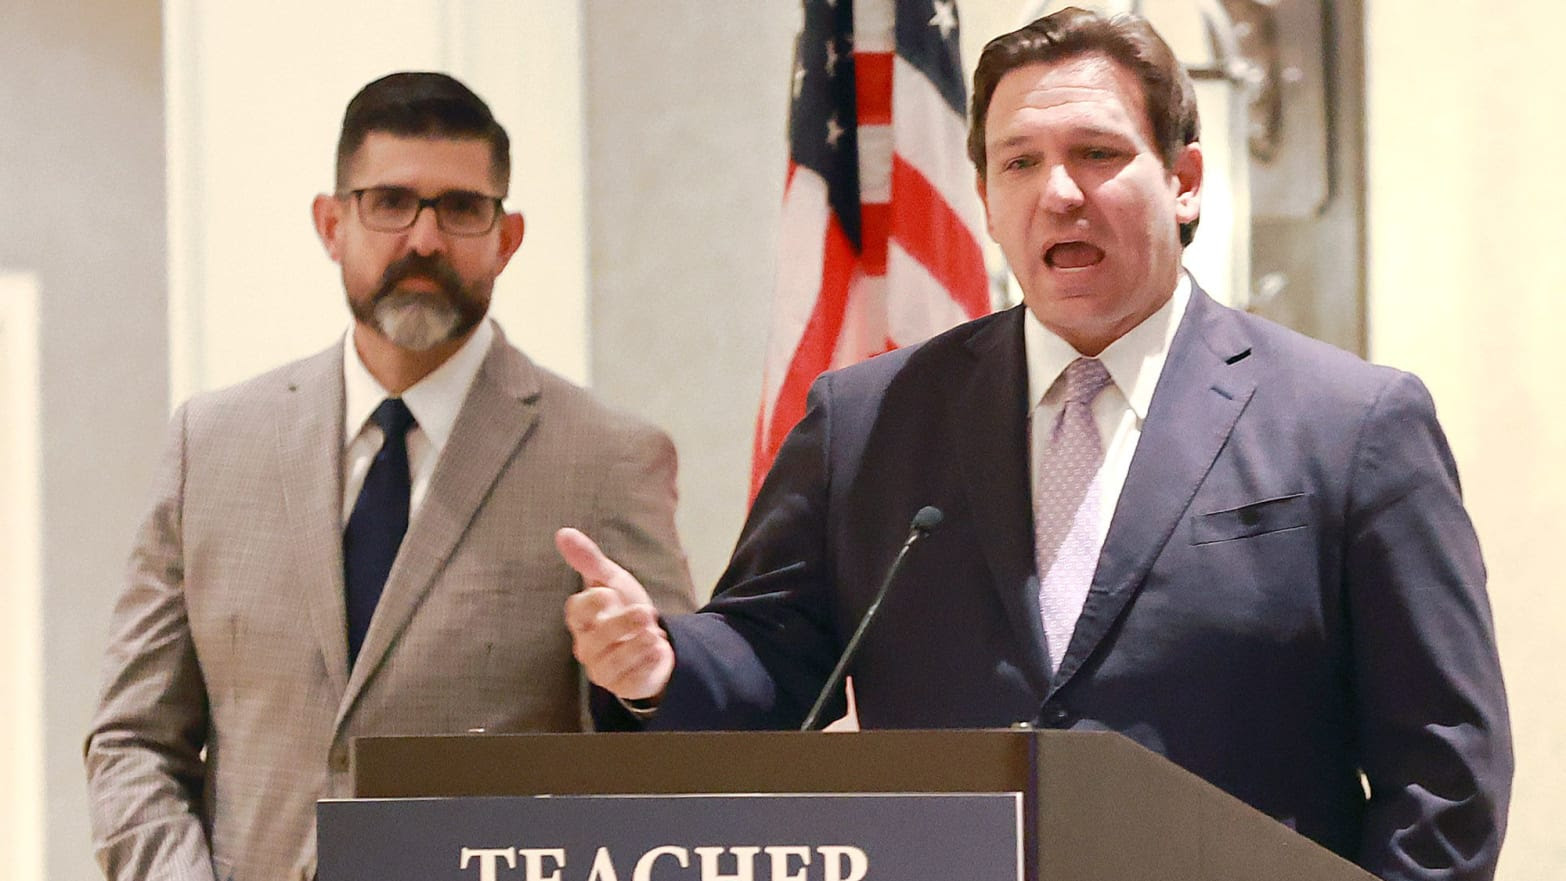 Florida Gov. Ron DeSantis speaks to teachers at a Florida Teacher of the Year Conference at the J.W. Marriott Orlando.